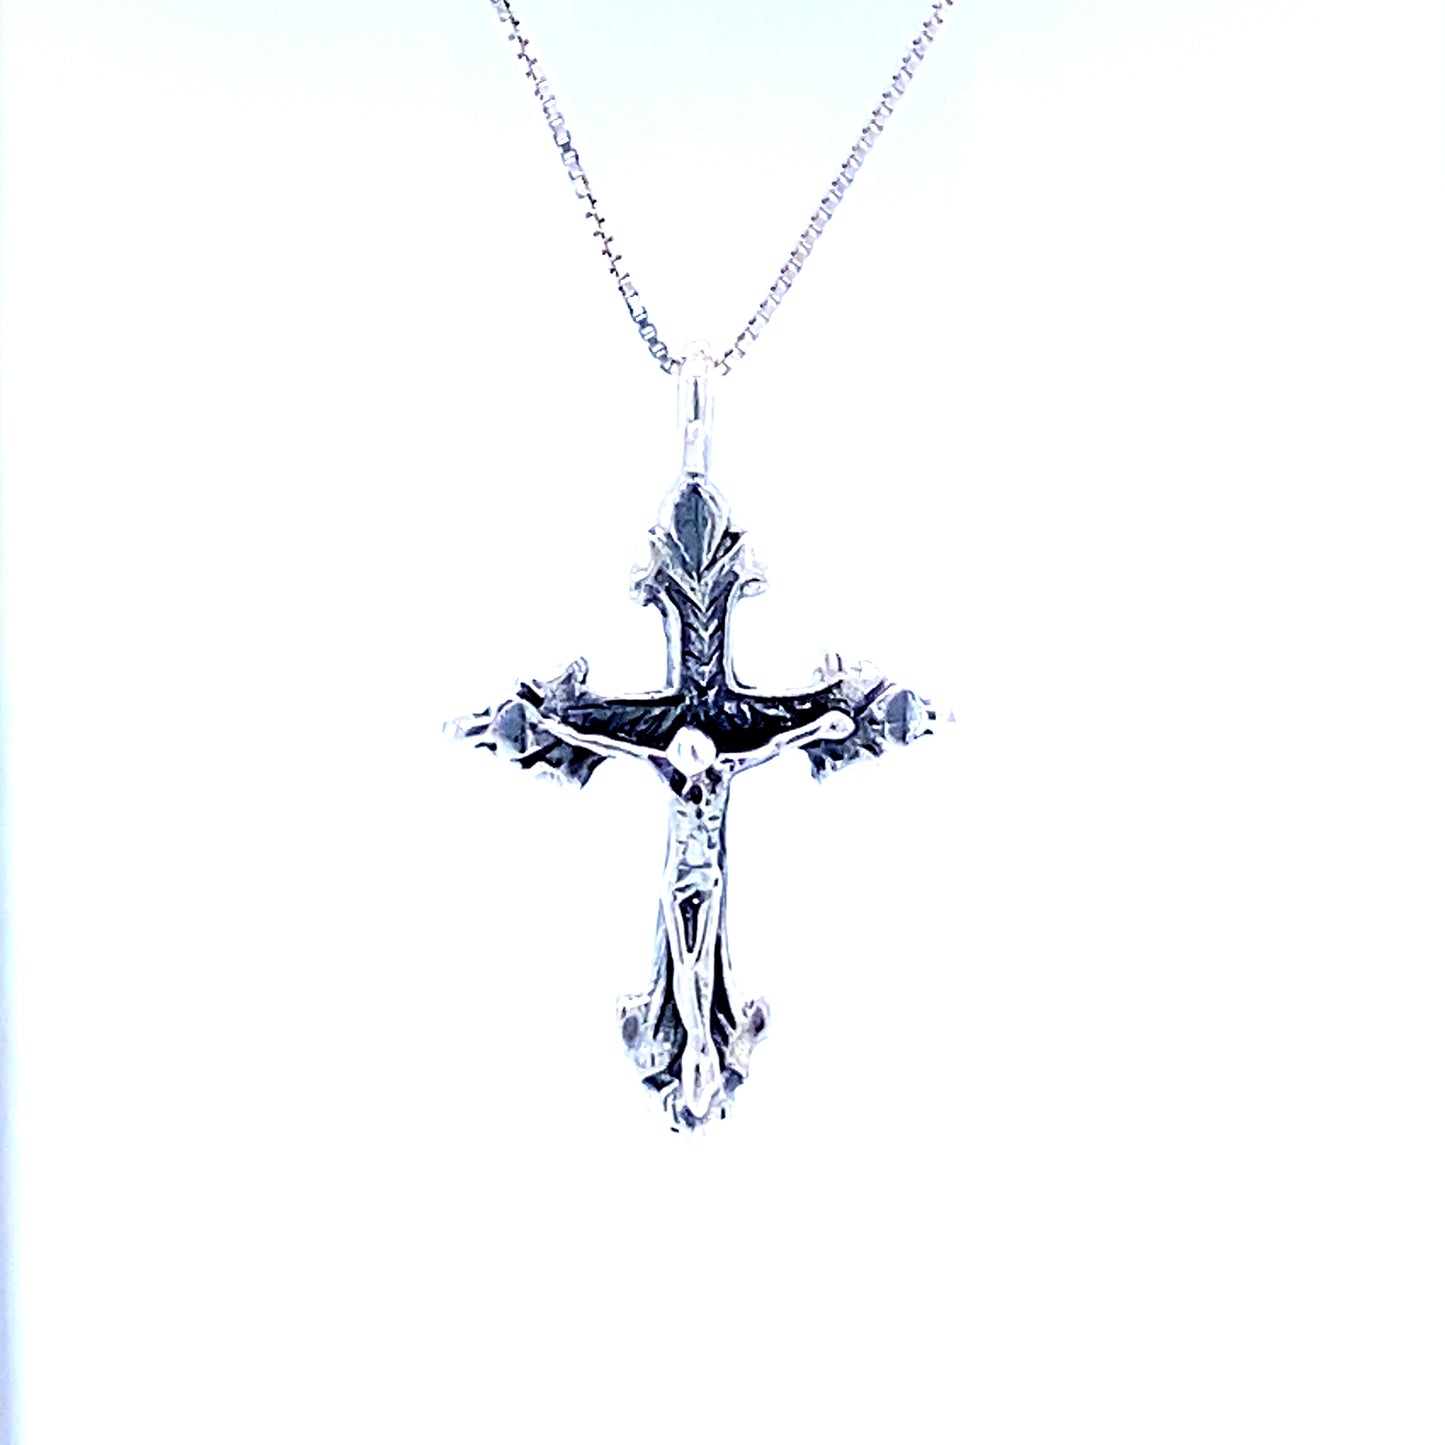 Ornate Crucifix Charm pendant with vintage appeal in Super Silver sterling silver.